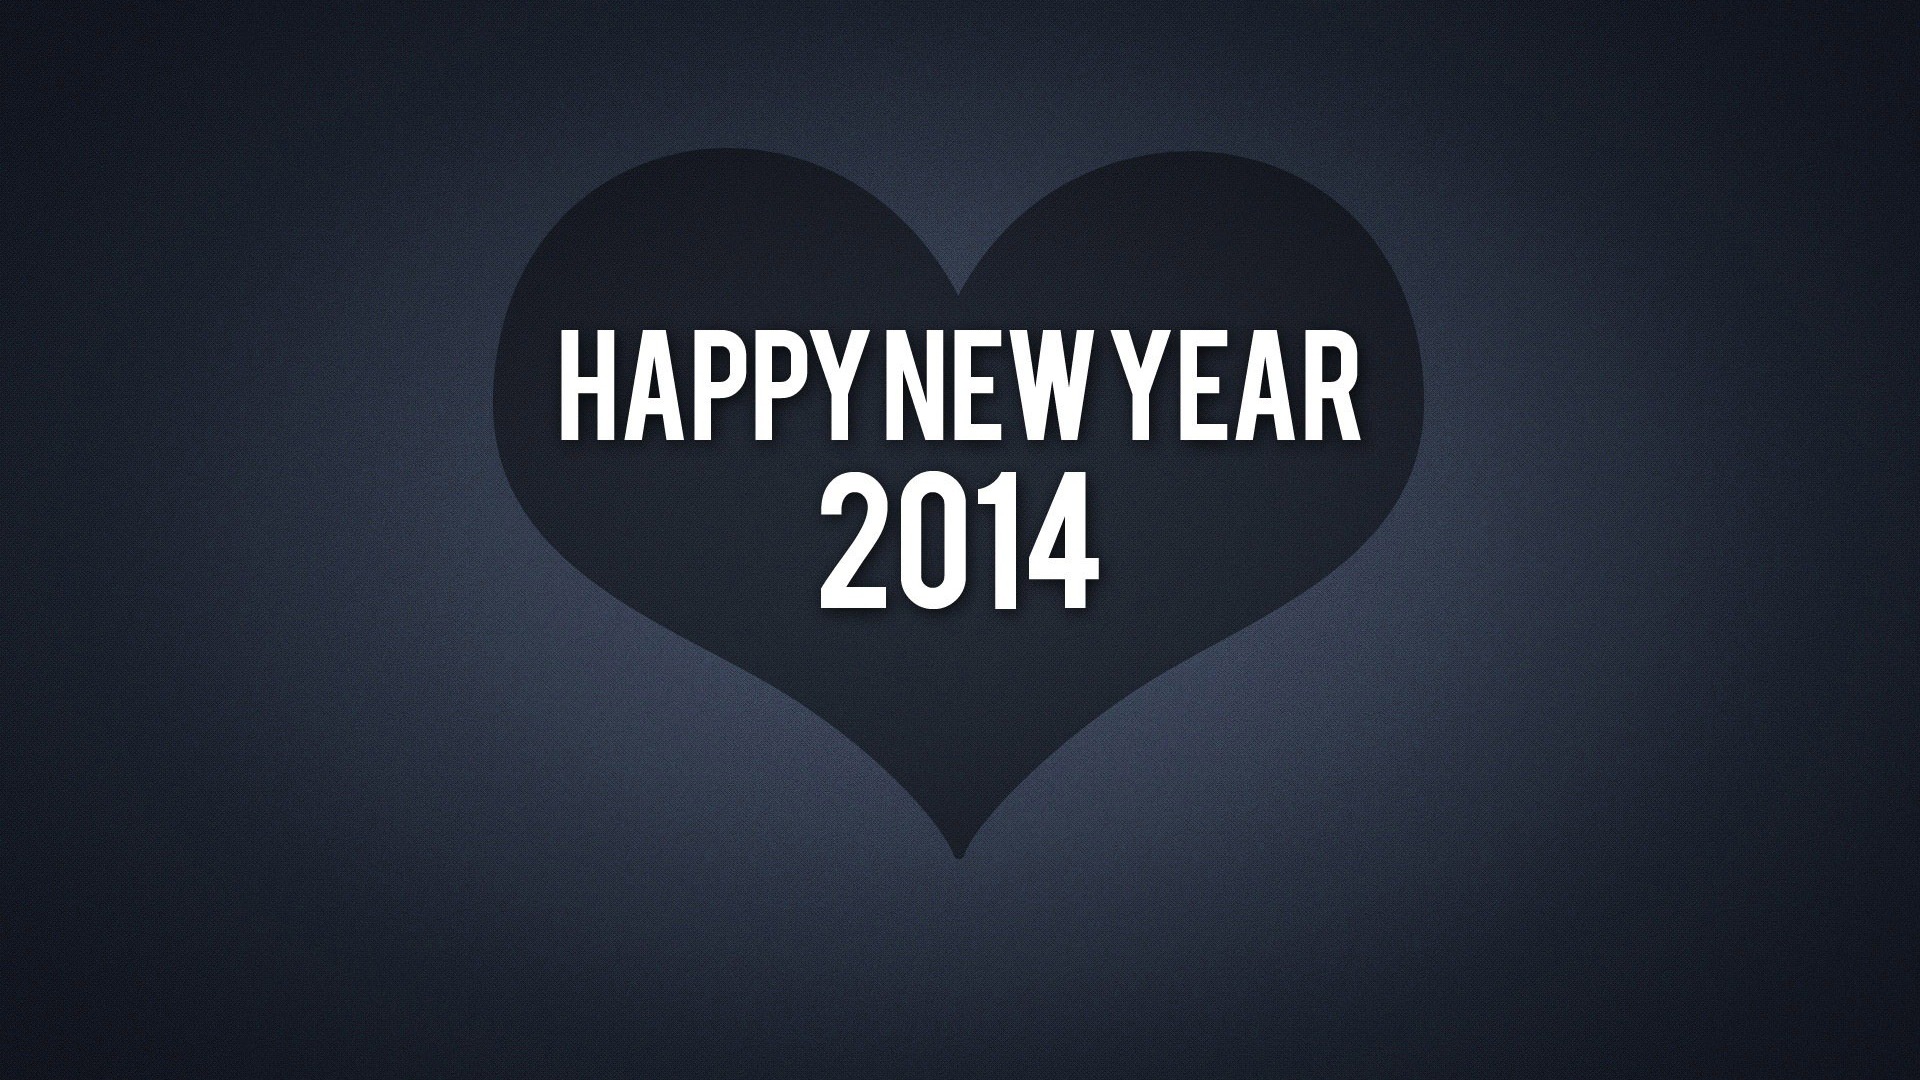 2014 New Year Theme HD Wallpapers (2) #20 - 1920x1080